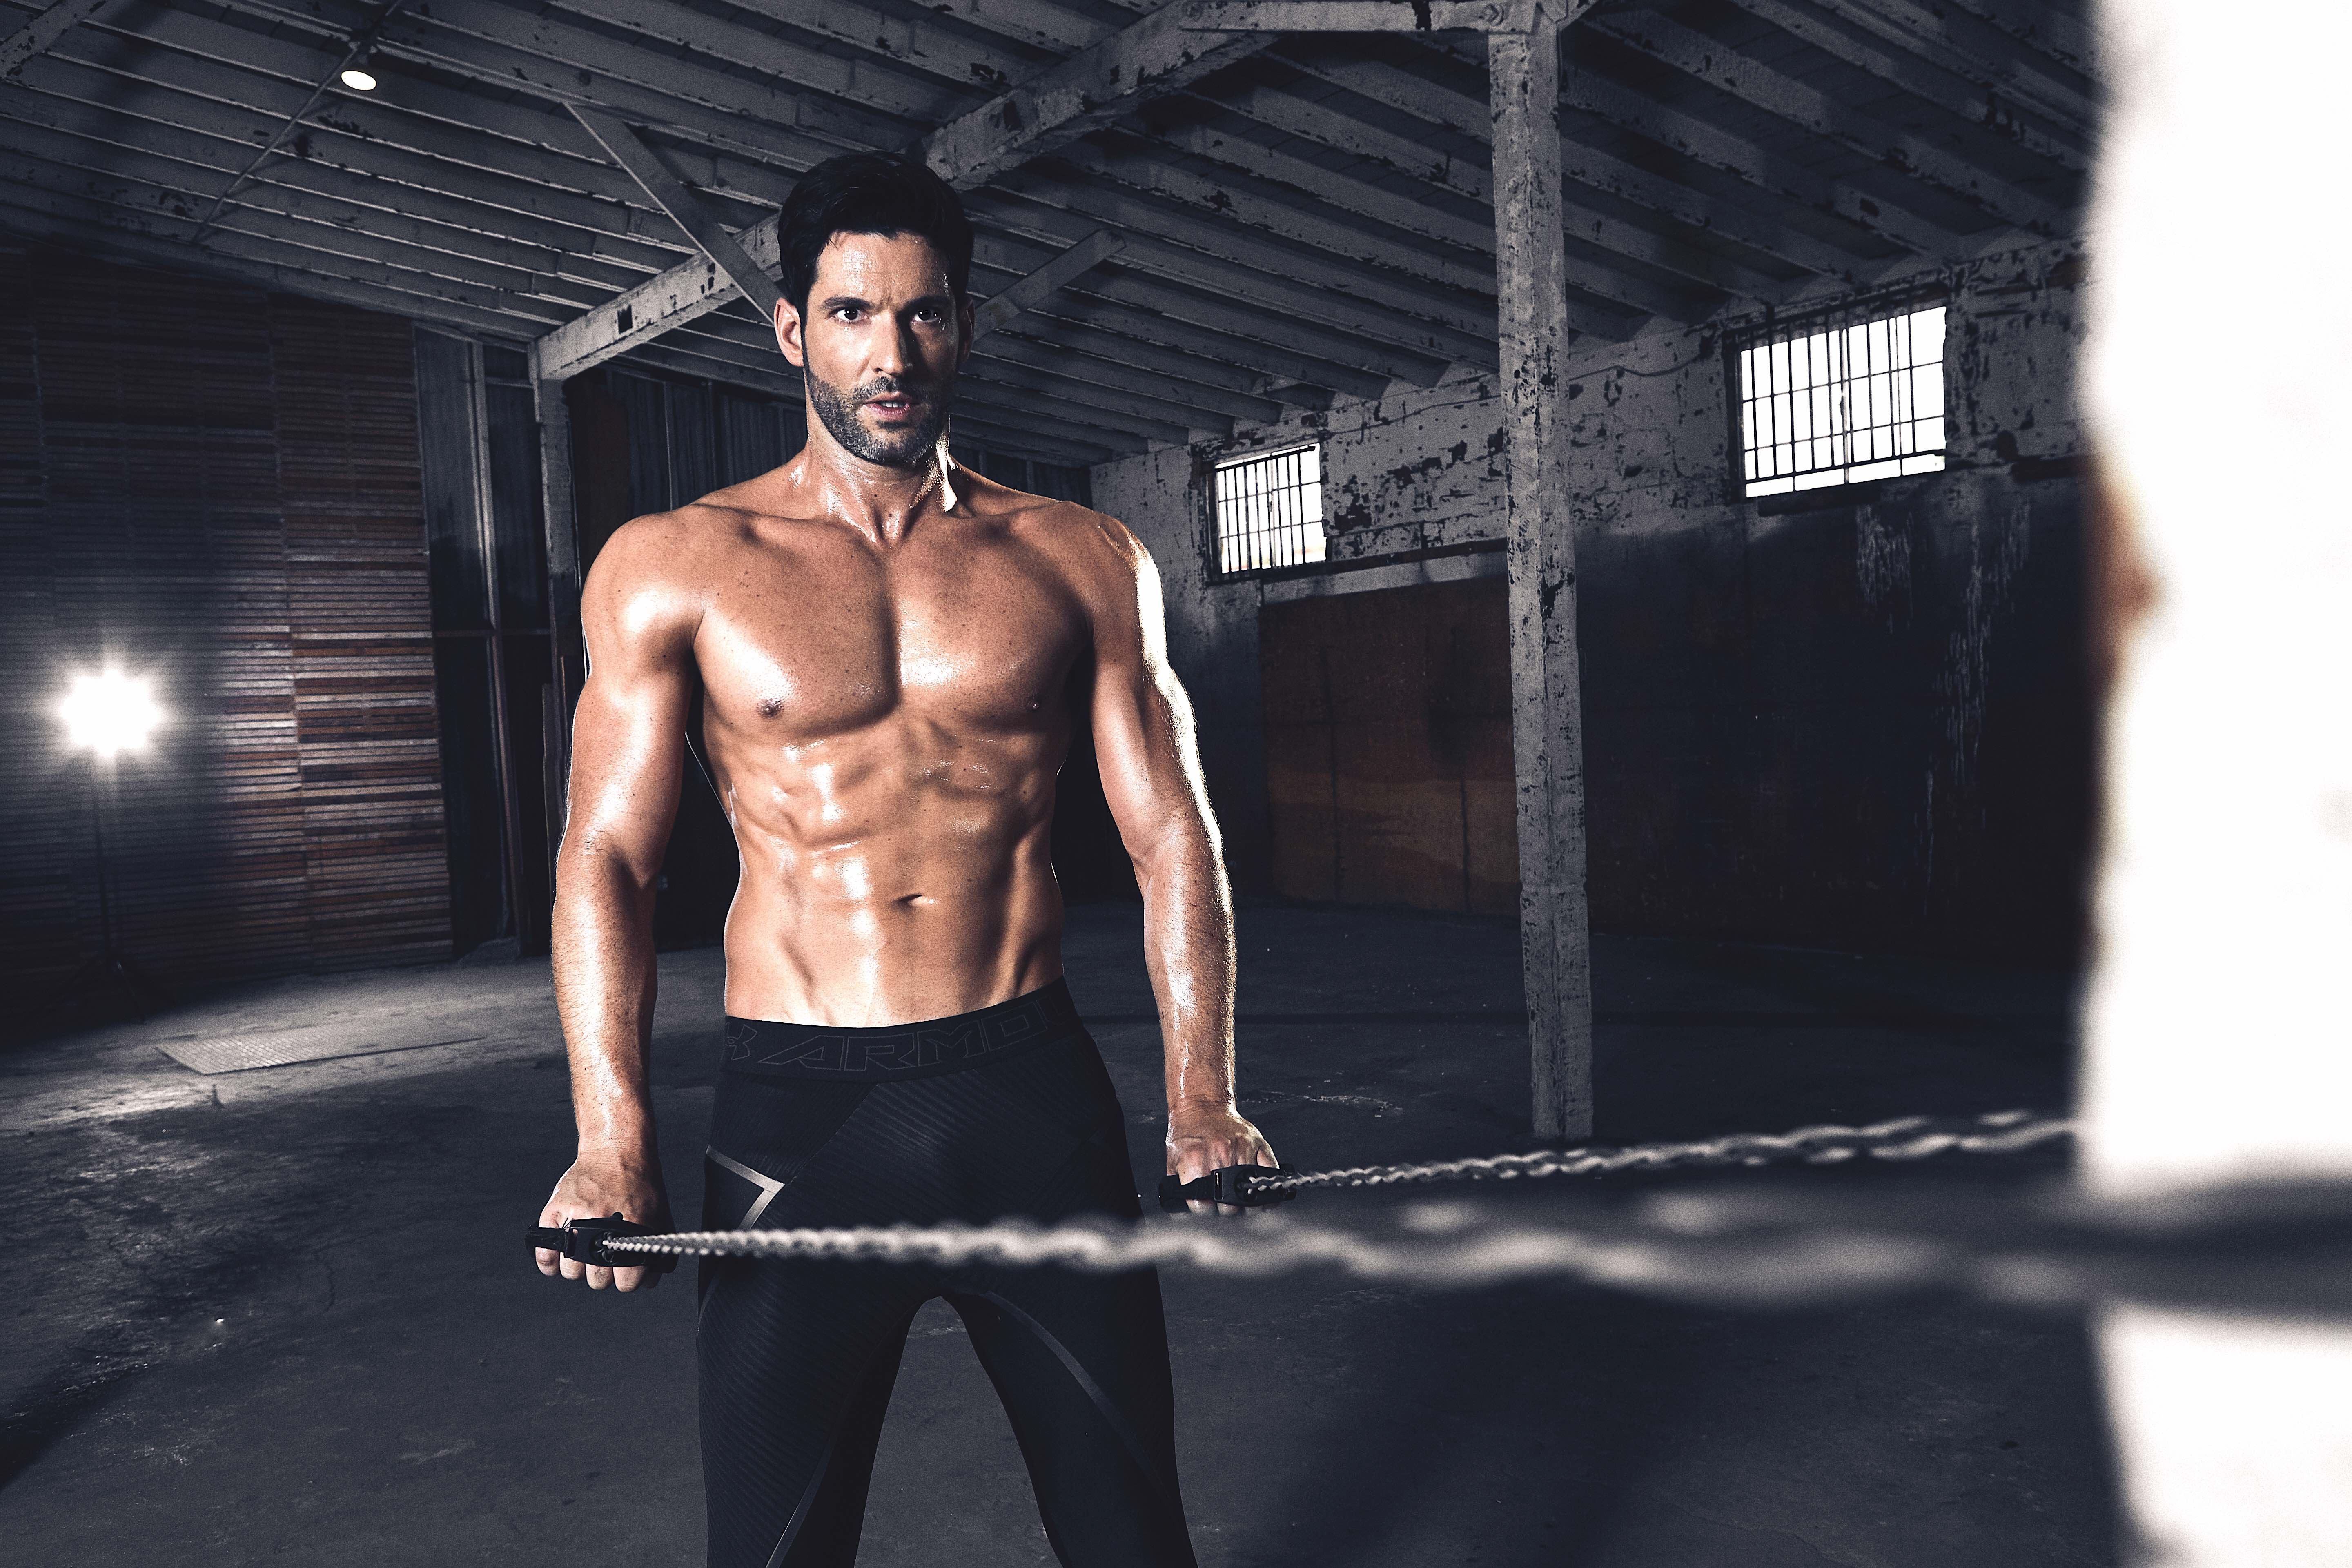 Lucifer' Star Tom Ellis 'Cannot Wait Until the People See This